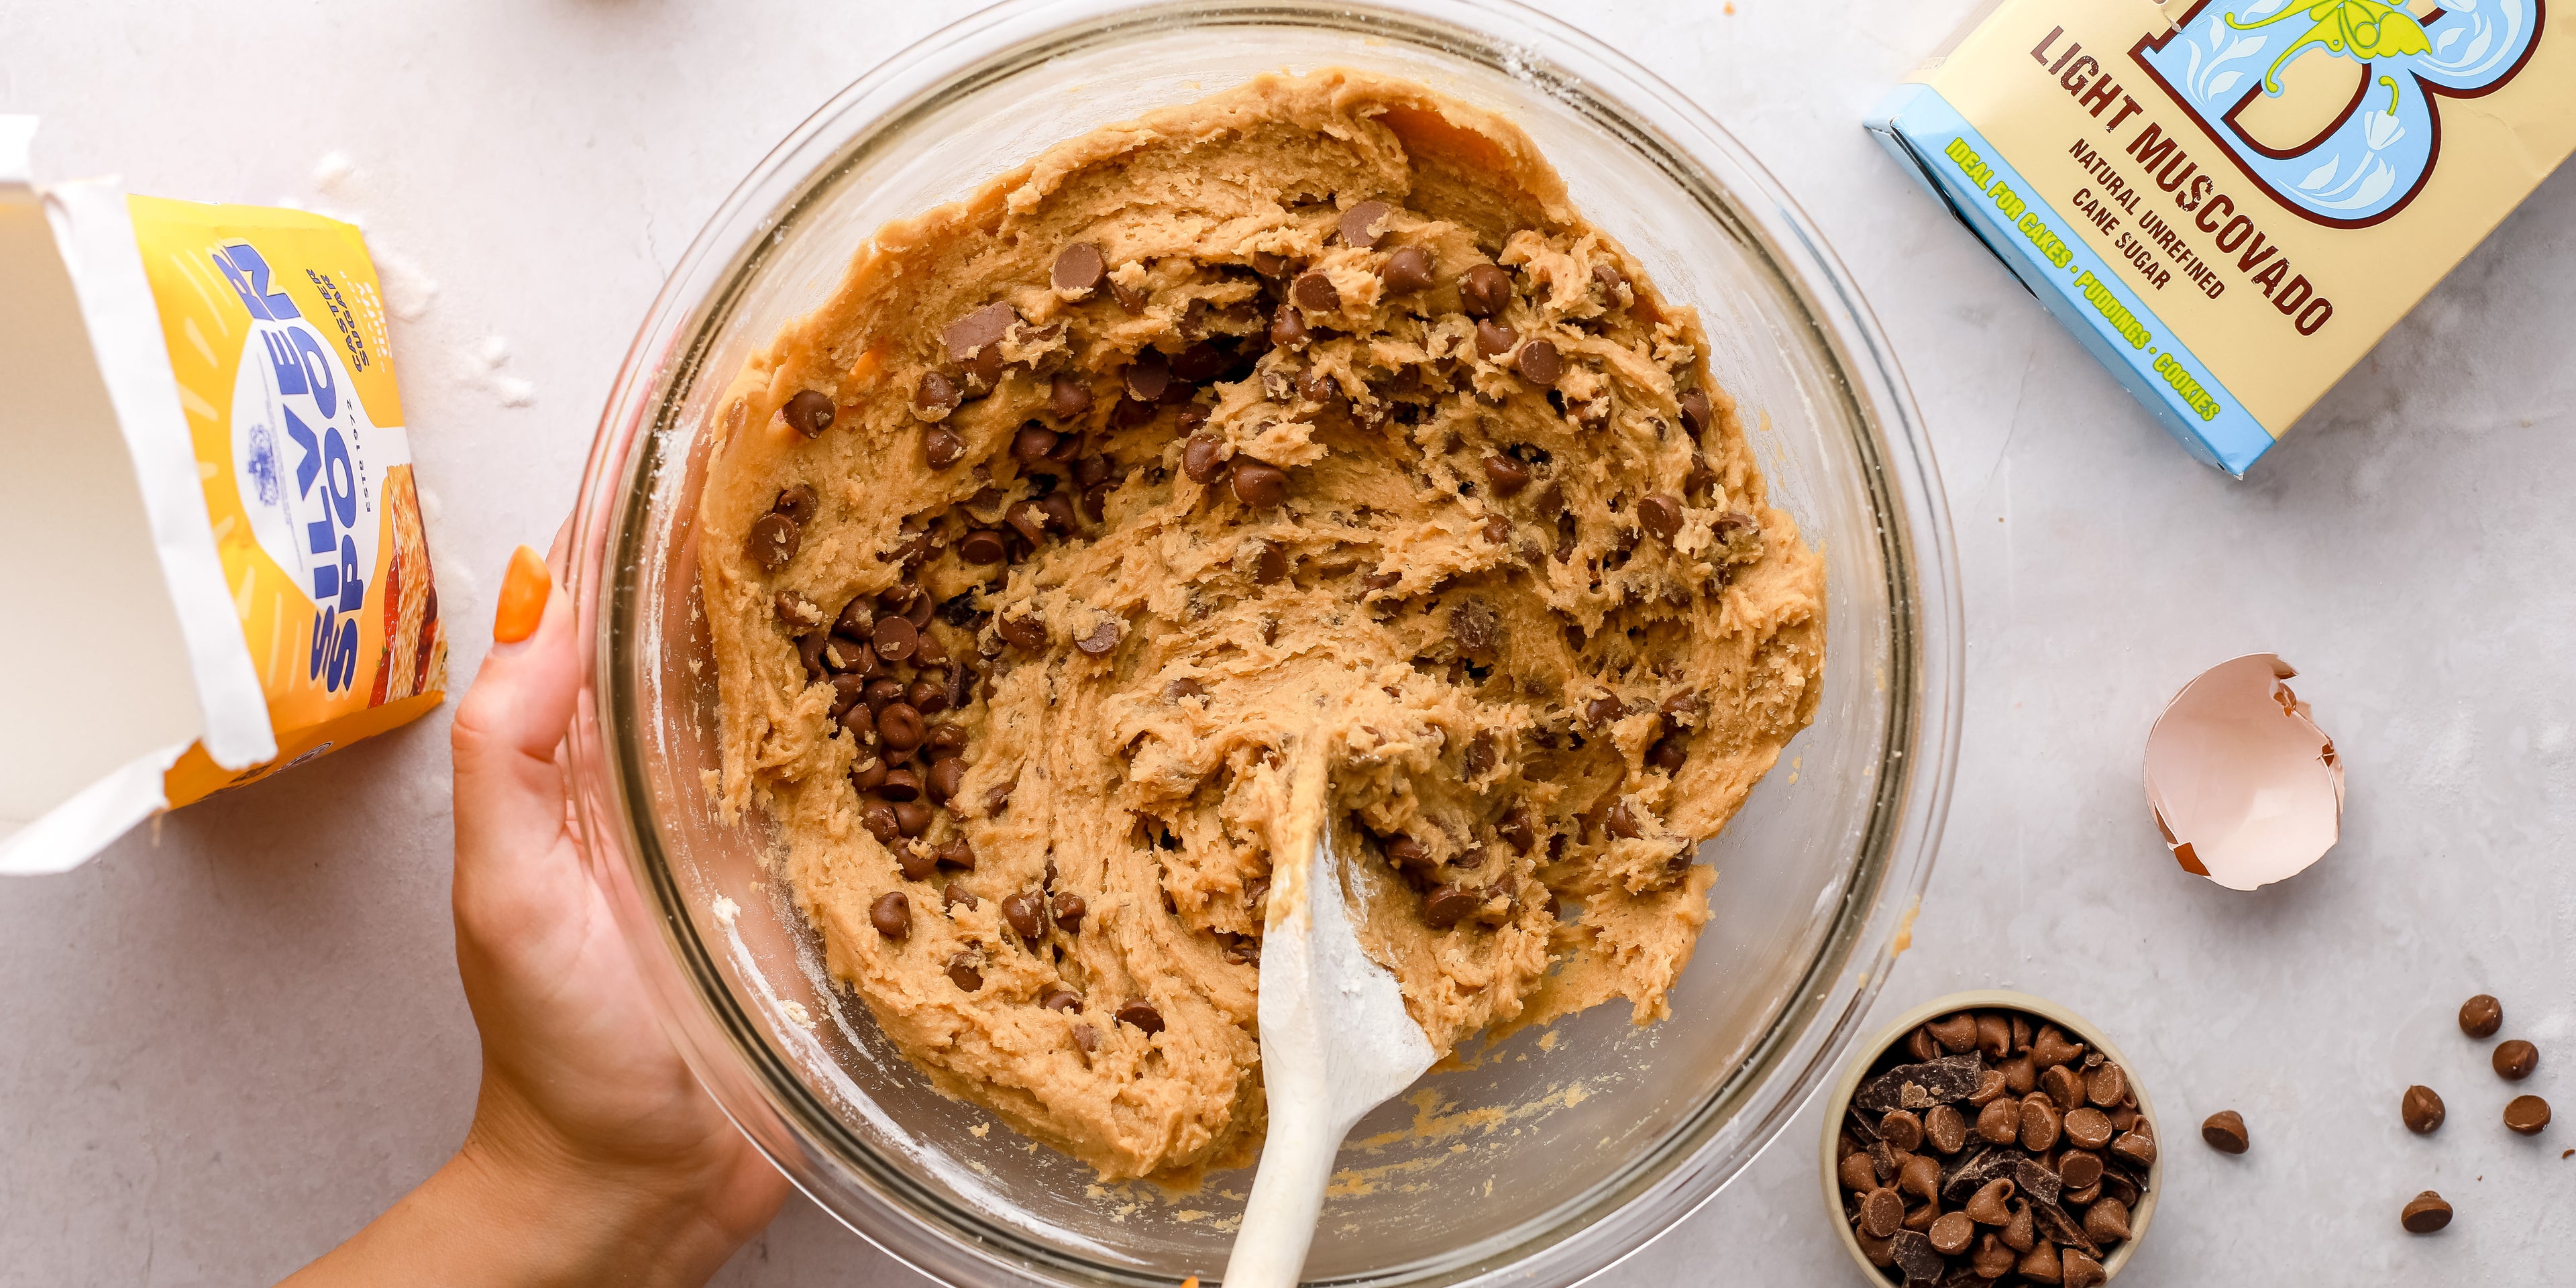 Homemade Millie’s chocolate chip cookie dough in a glass bowl